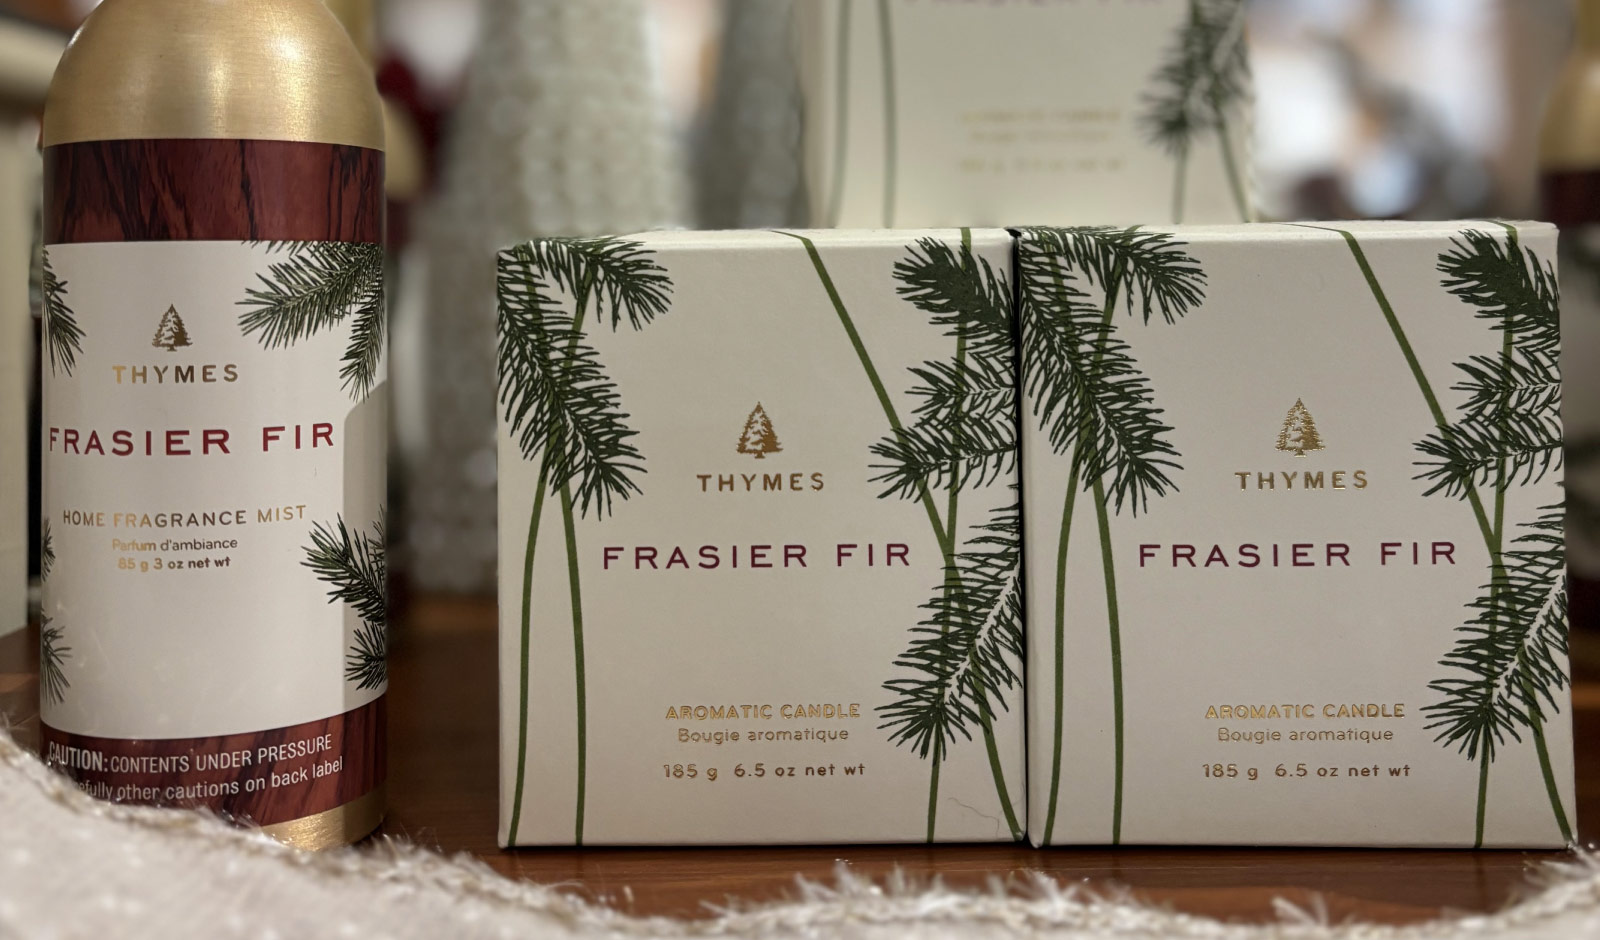 Candles and room spray in Frasier Fir scent